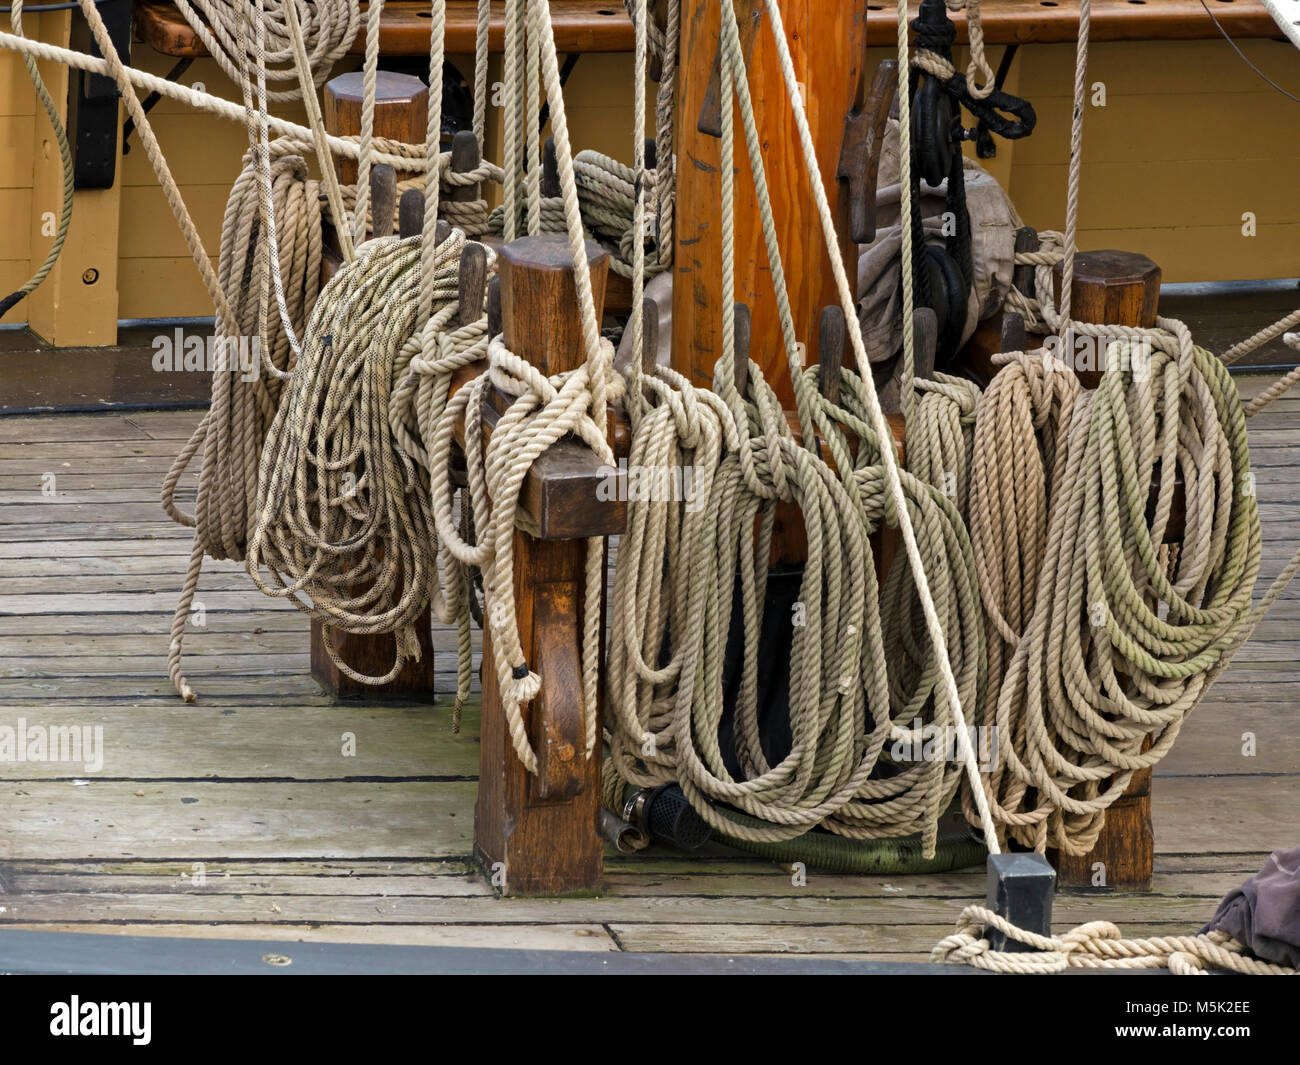 Detail of coiled stored ropes from rigging on deck of tall-ship Phoenix in Charlestown Harbour, Cornwall, England, UK Stock Photo